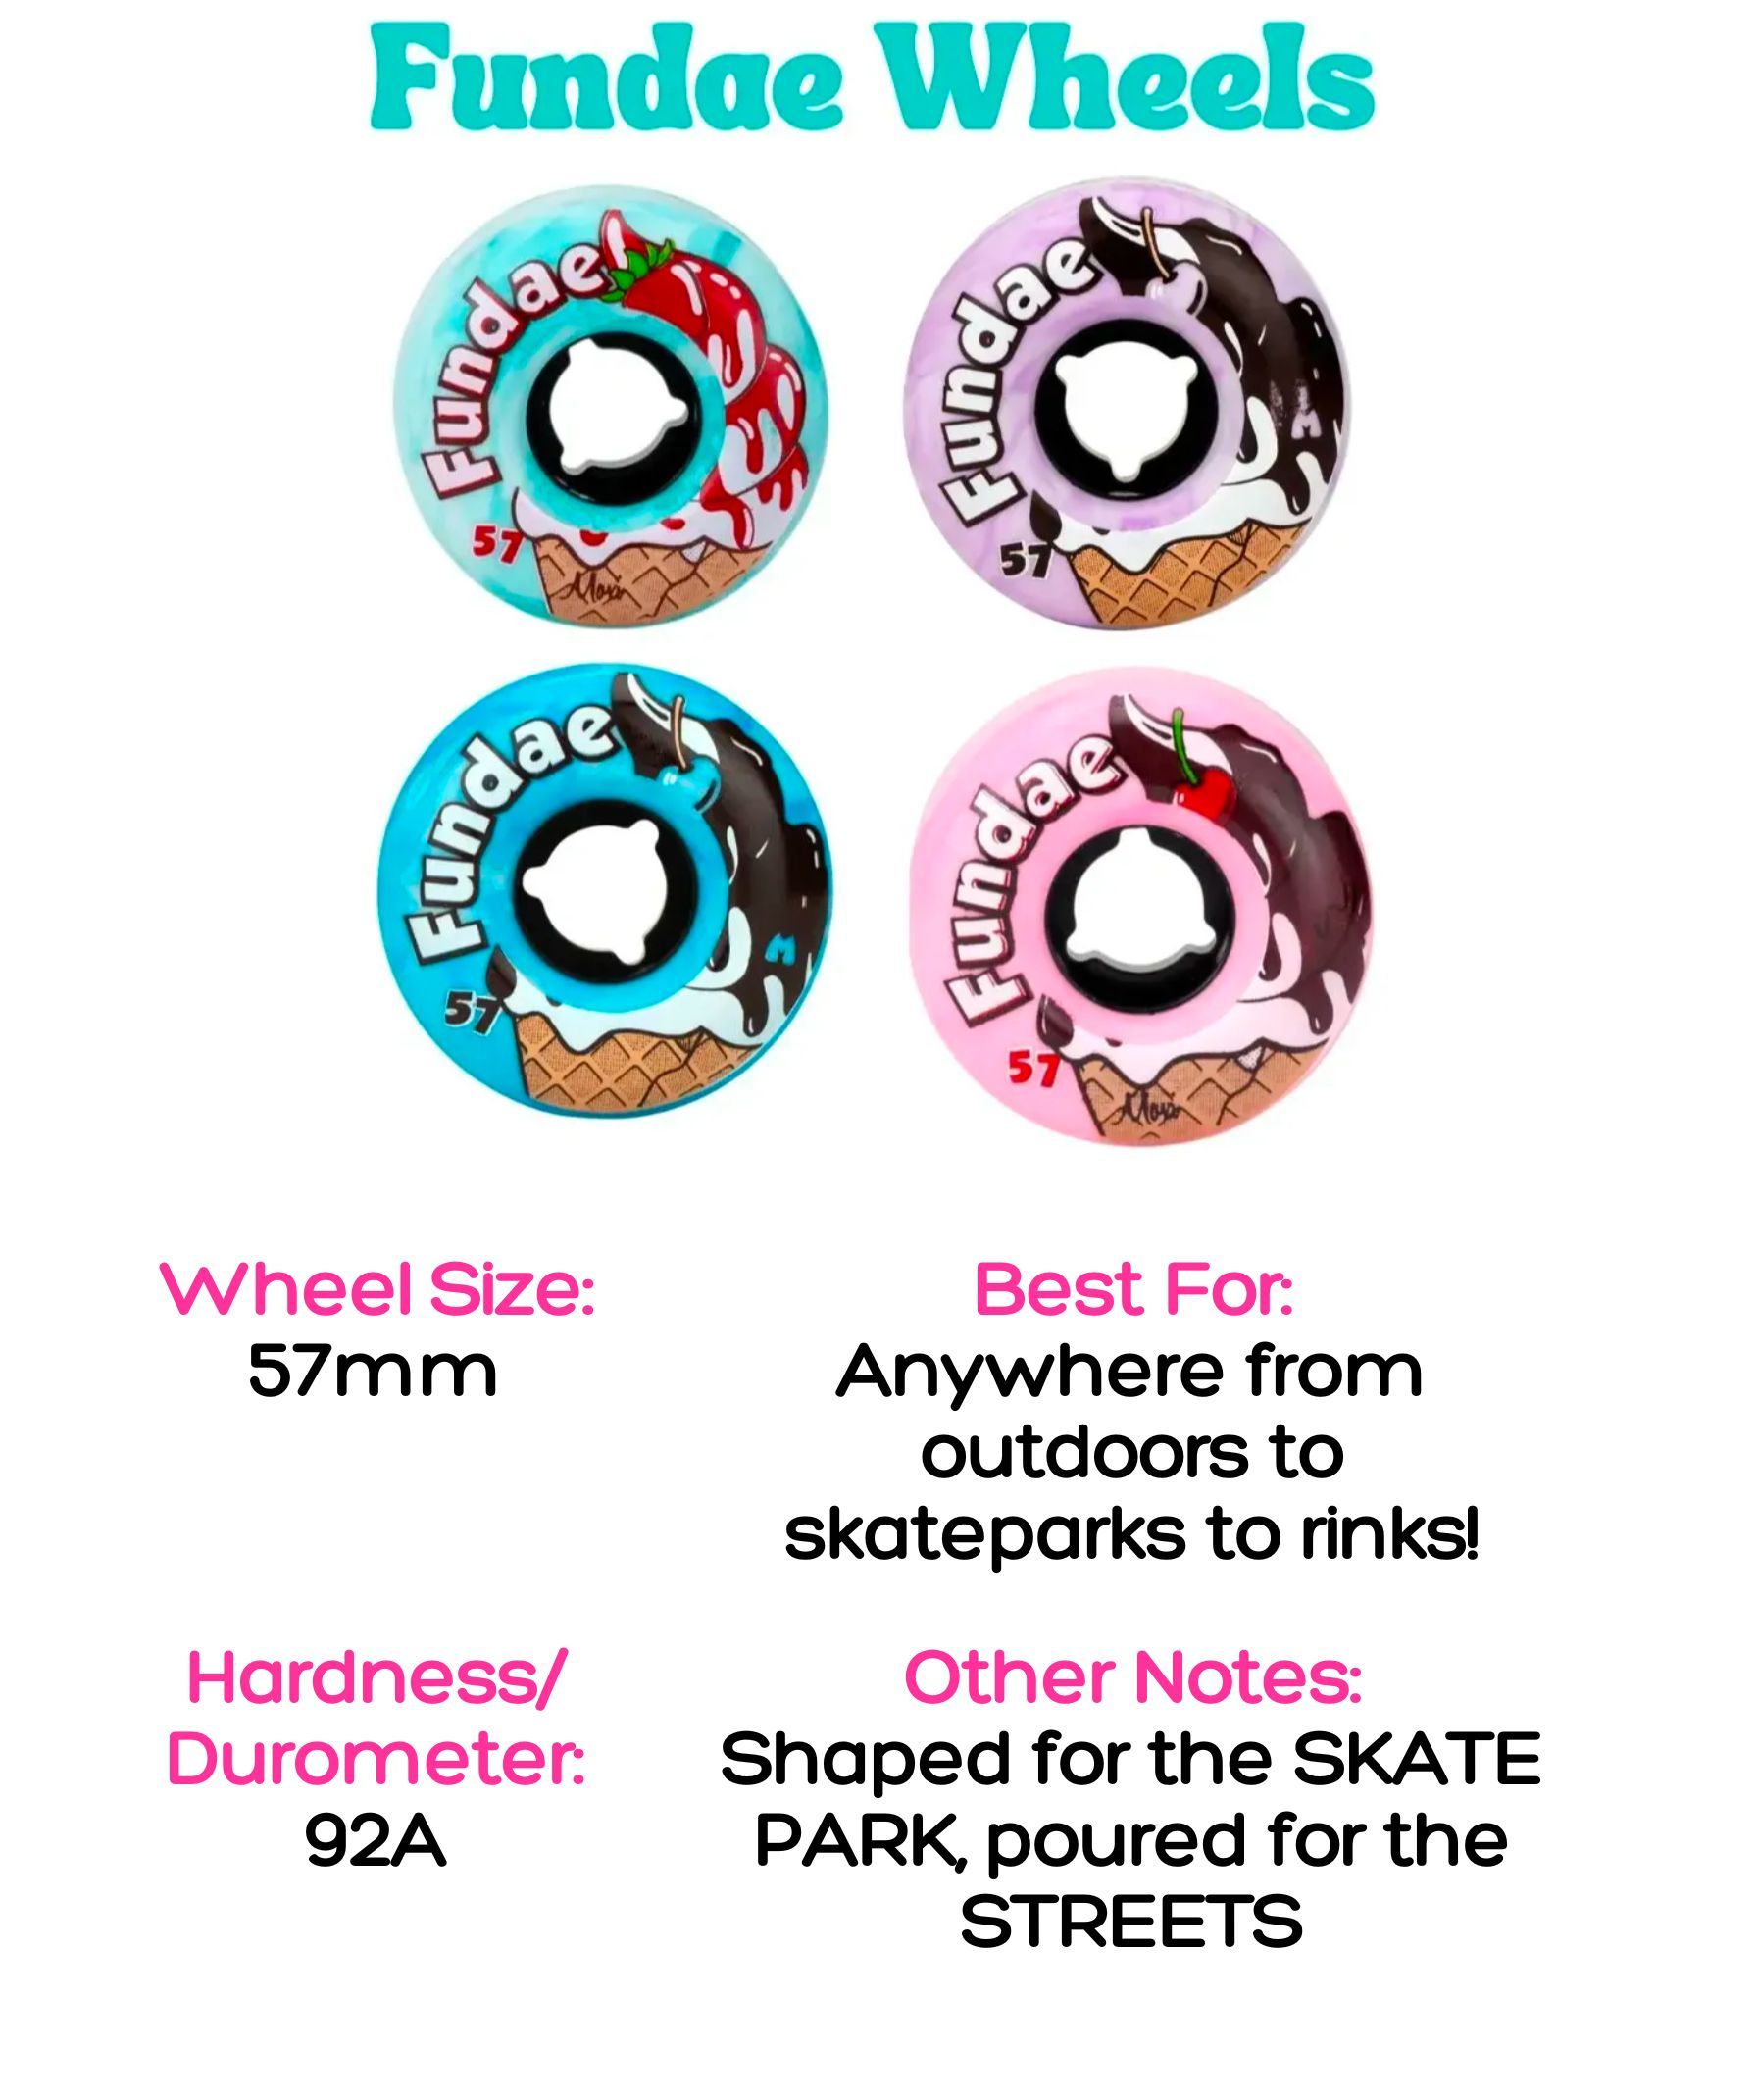 fundae wheels, 57mm, 92A hardness, best for anywhere from outdoors to skateparks and rinks, shaped for the skate park, poured for the streets.